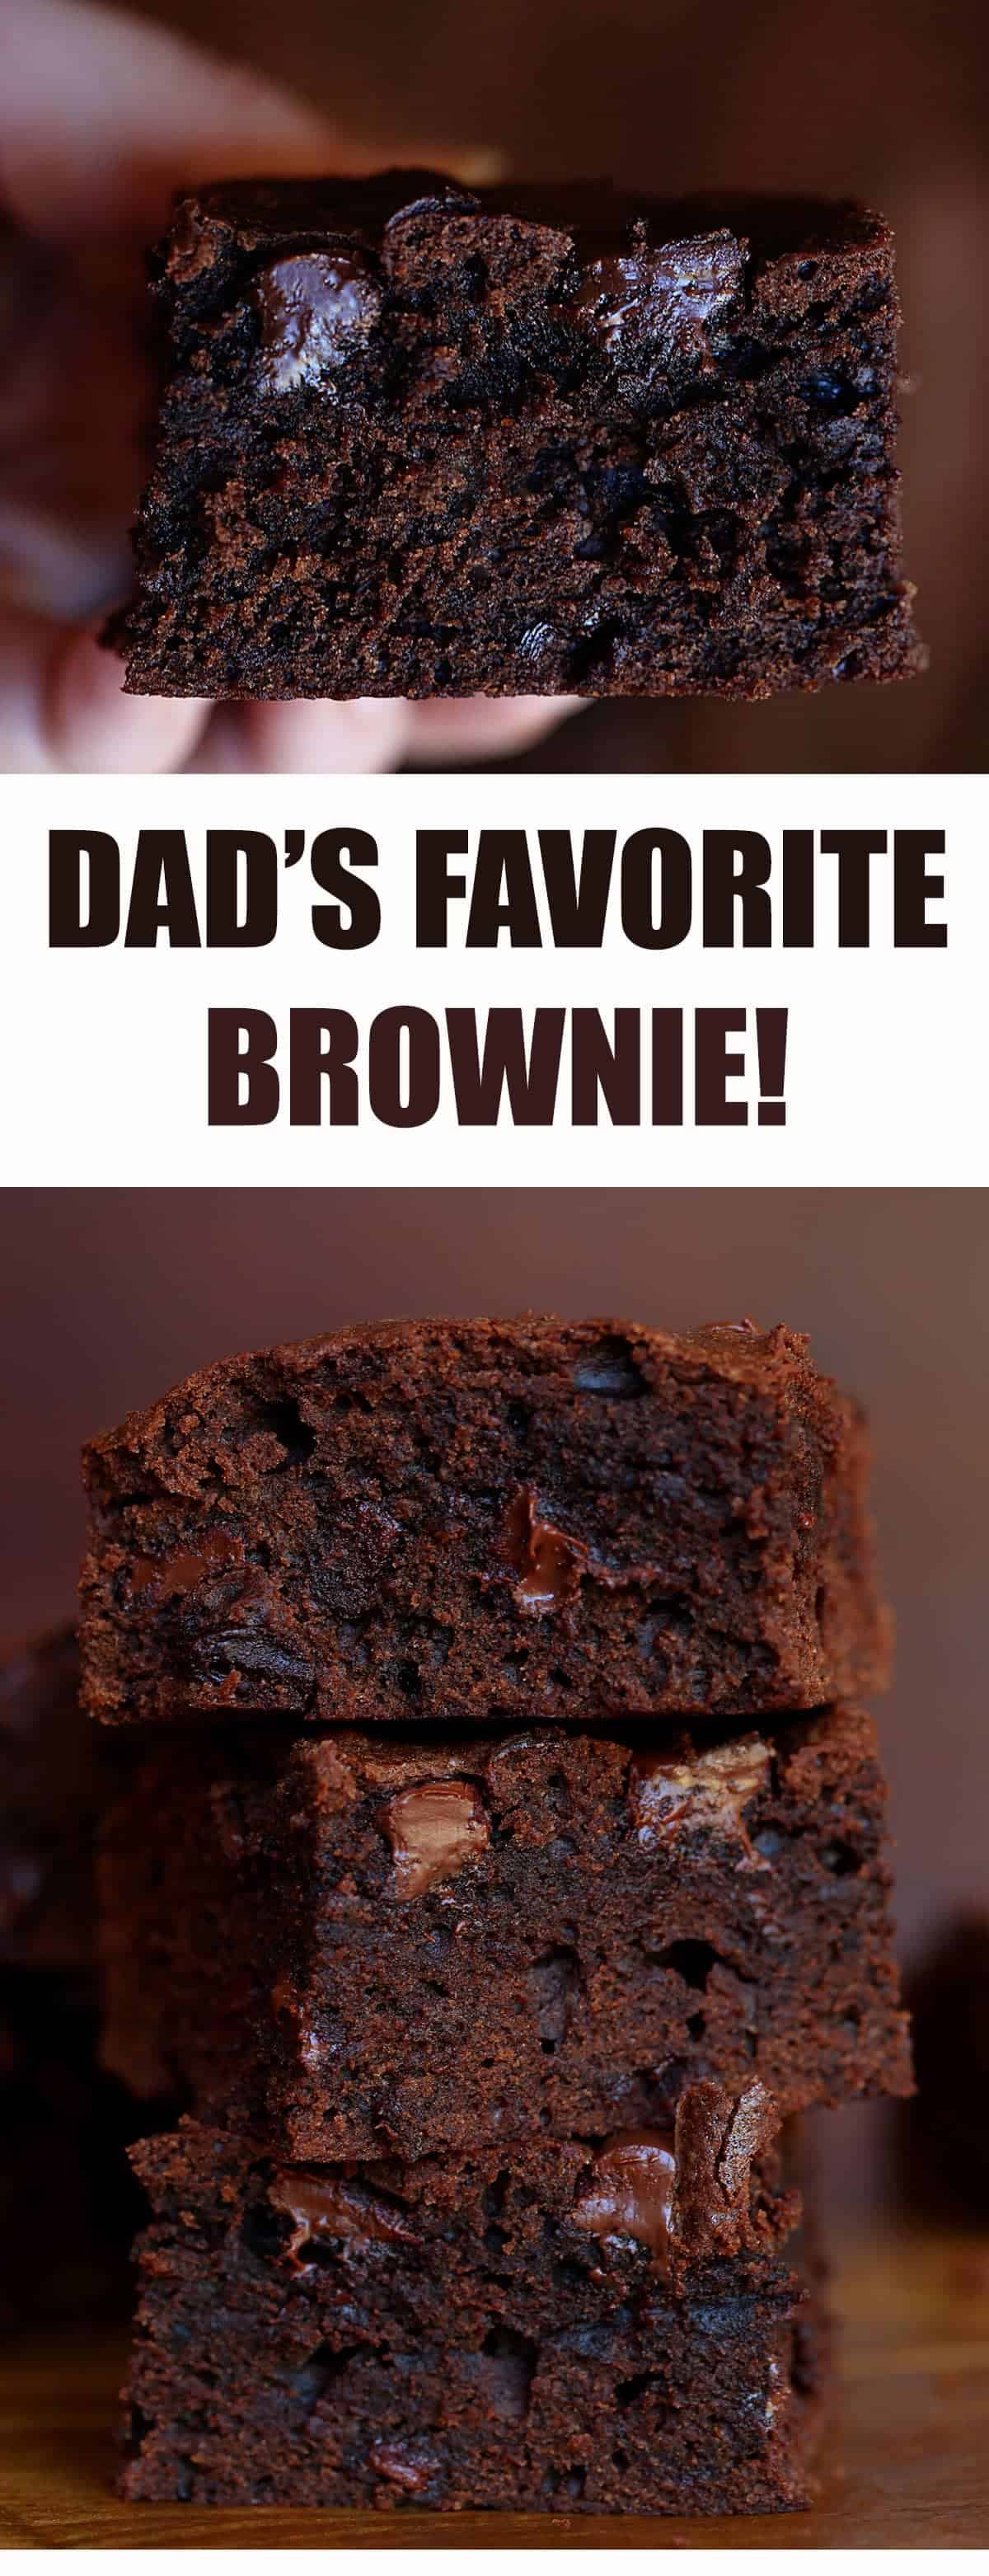 Beer Brownies!! (use a good IPA if that's dad's favorite!)